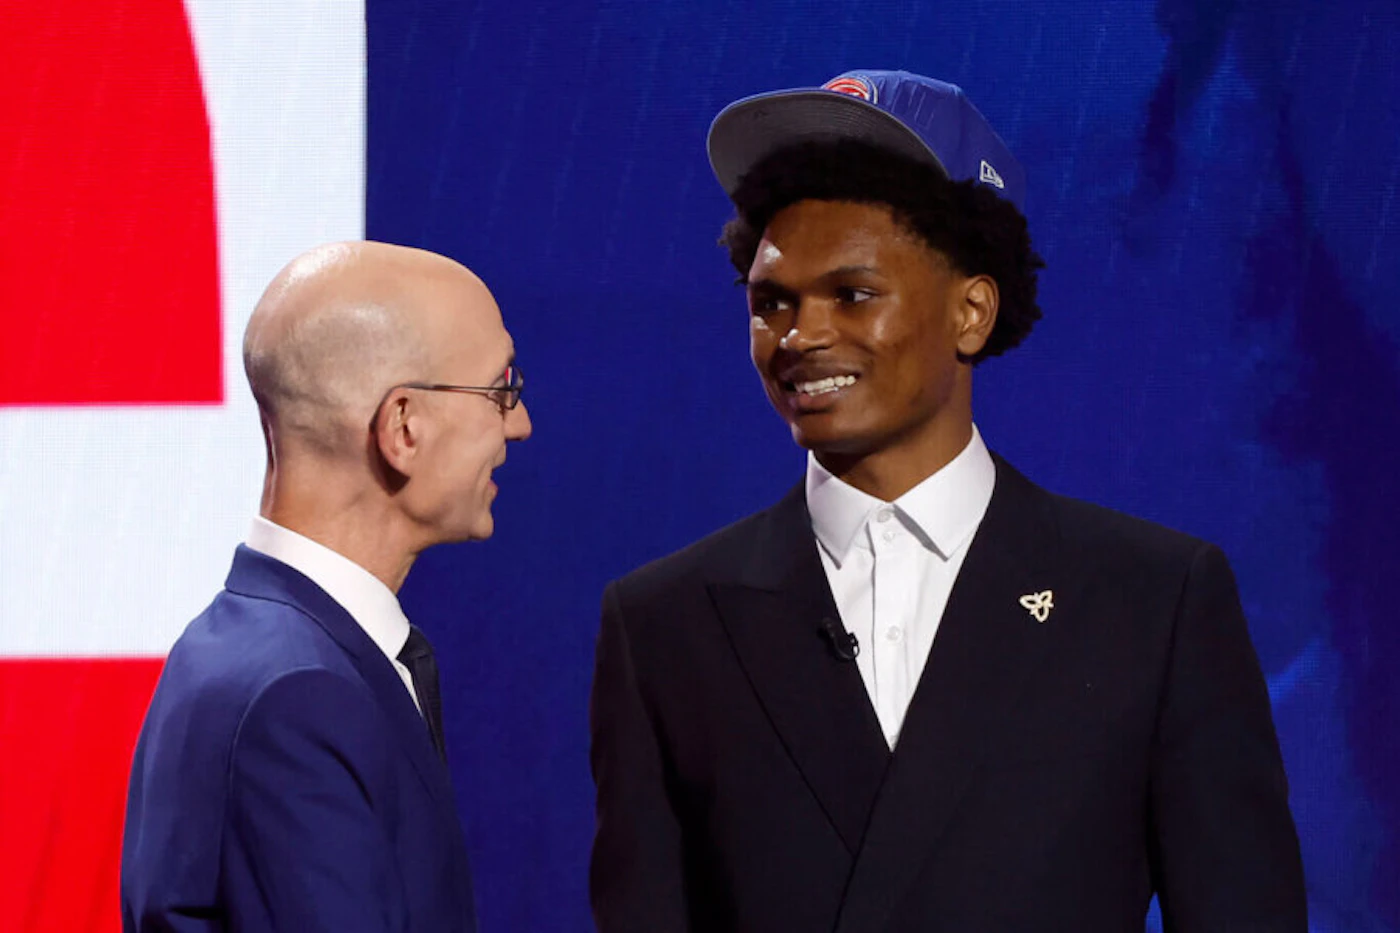 NEW YORK, NEW YORK - JUNE 22: Ausar Thompson (R) poses with NBA commissioner Adam Silver (L) after being drafted fifth overall pick by the Detroit Pistons during the first round of the 2023 NBA Draft at Barclays Center on June 22, 2023 in the Brooklyn borough of New York City. (Photo by Sarah Stier/Getty Images)